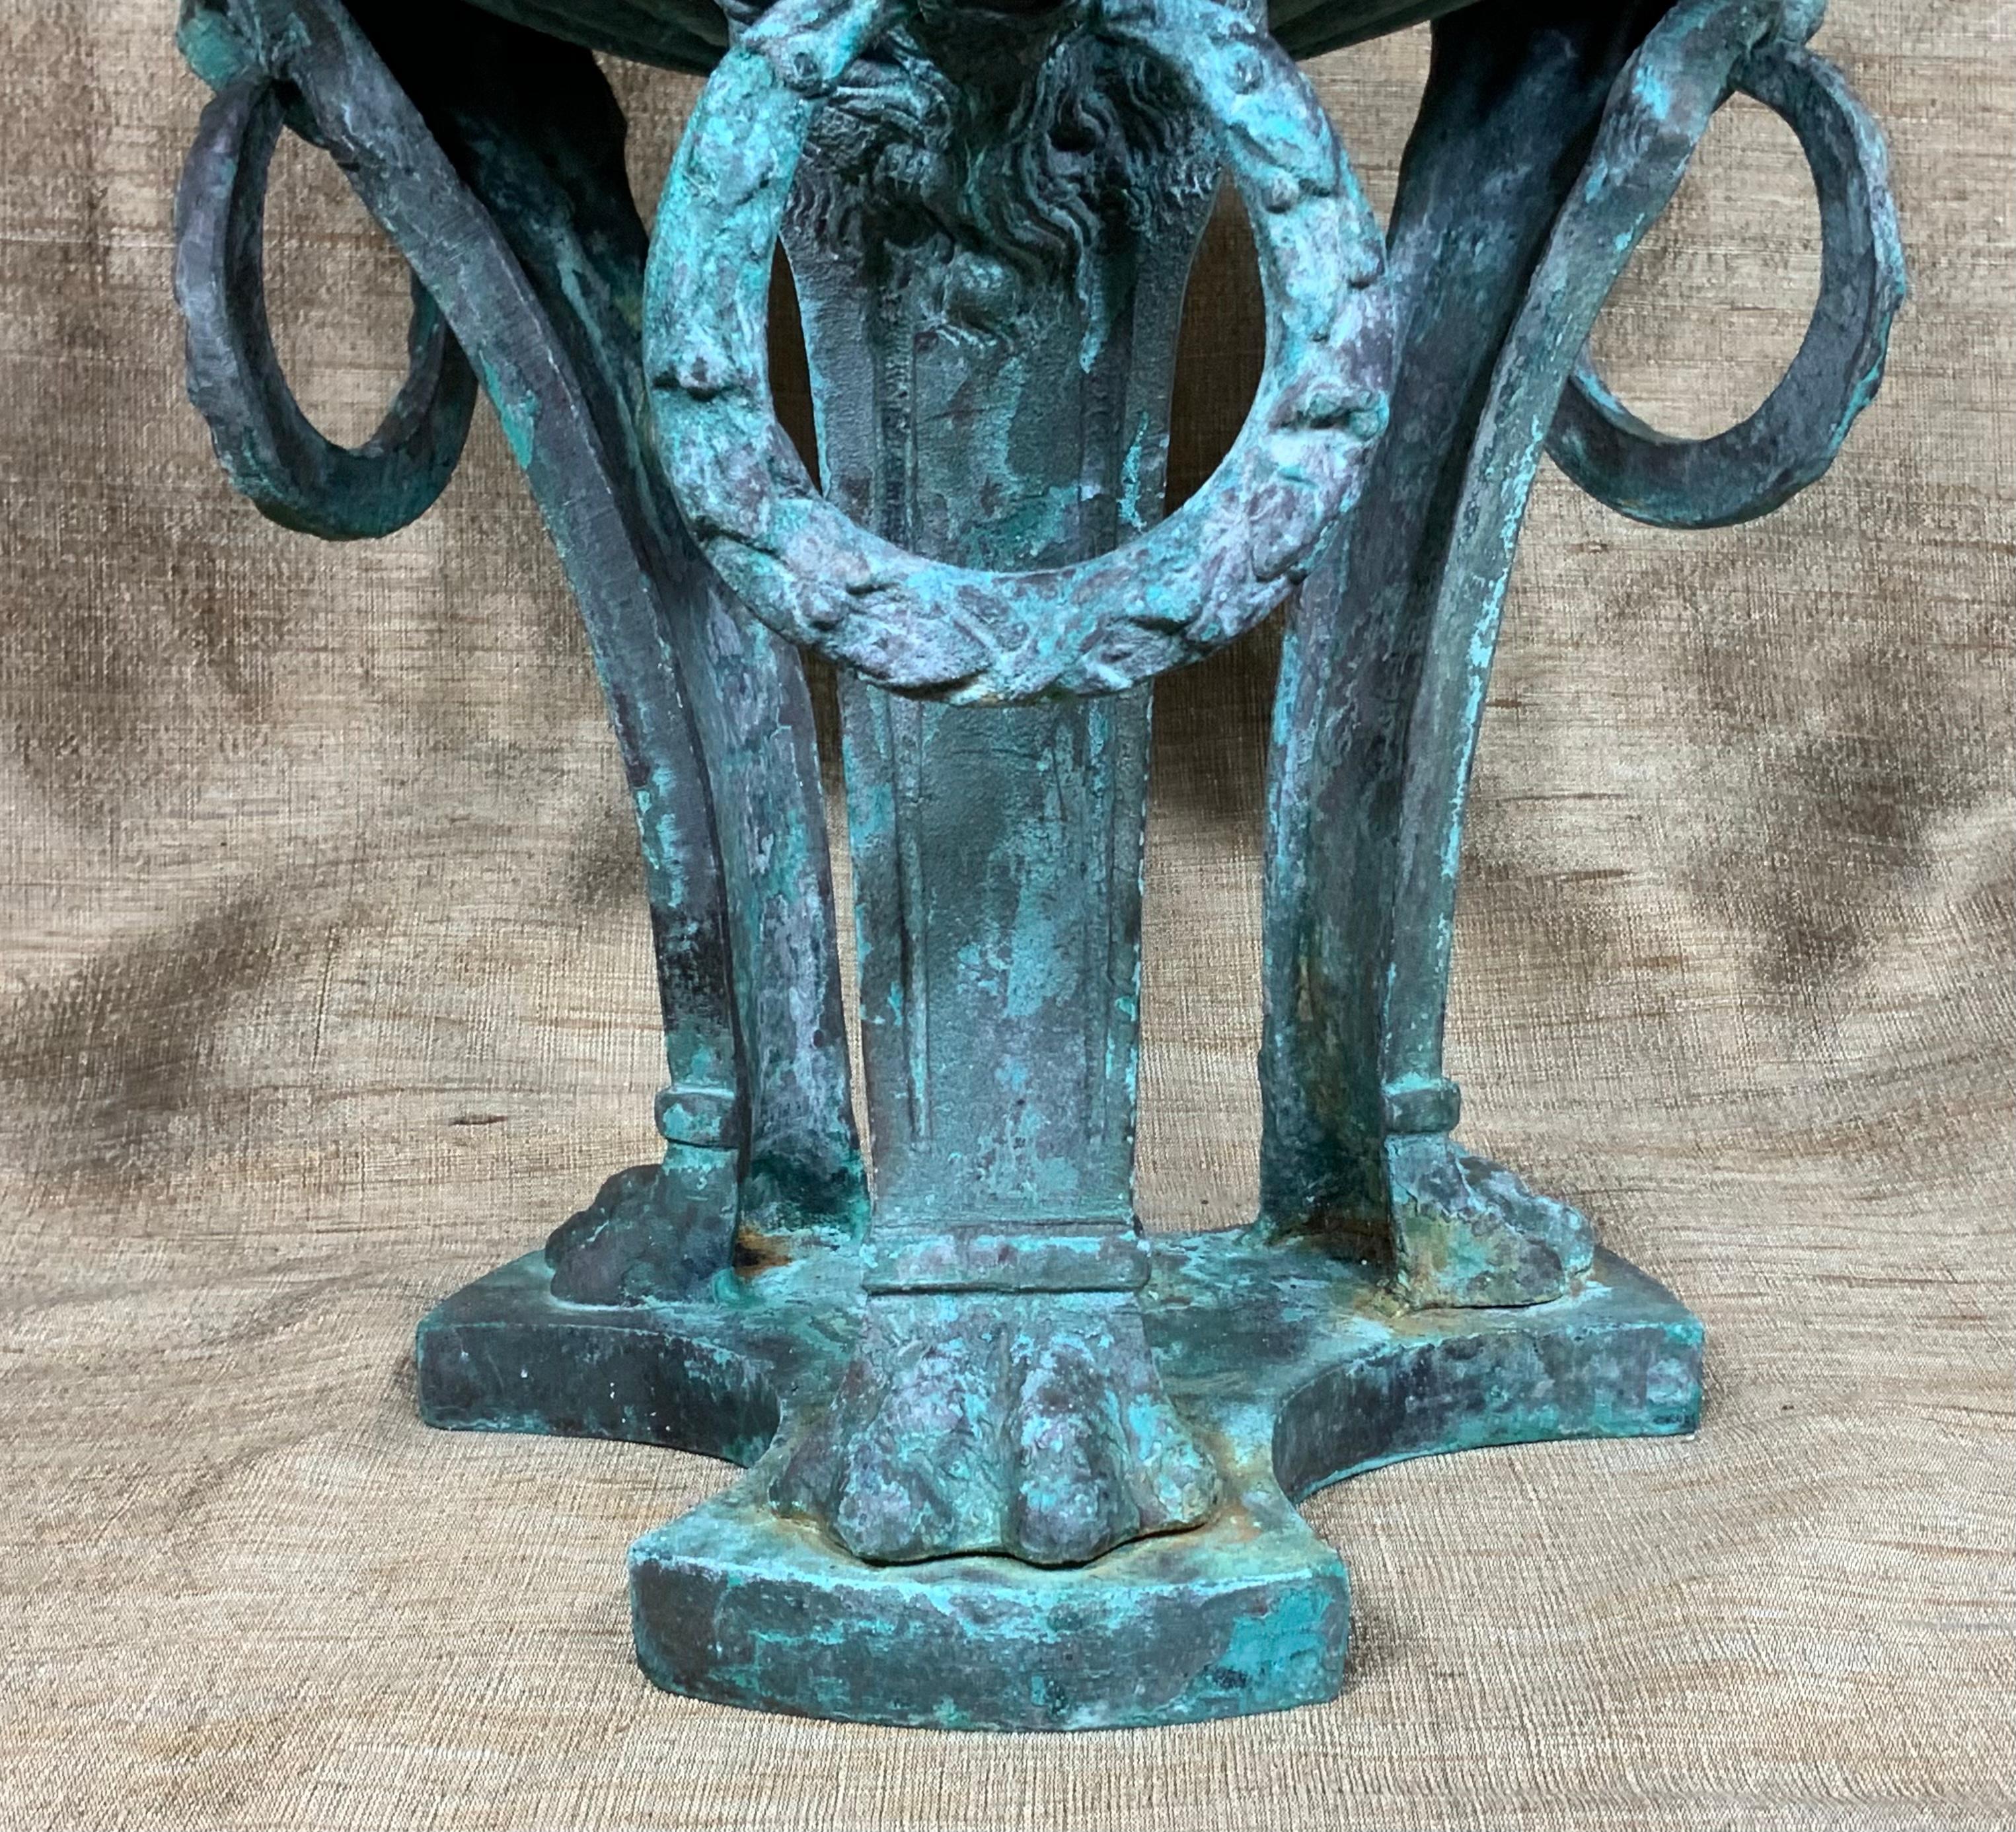 Exceptional antique French bronze architectural element used to be table lamp, and later in the years used as decorative object of art. Beautiful oxidized green-turquoise patina, lion heads with round reign, vine and Greek key motifs, one of a kind